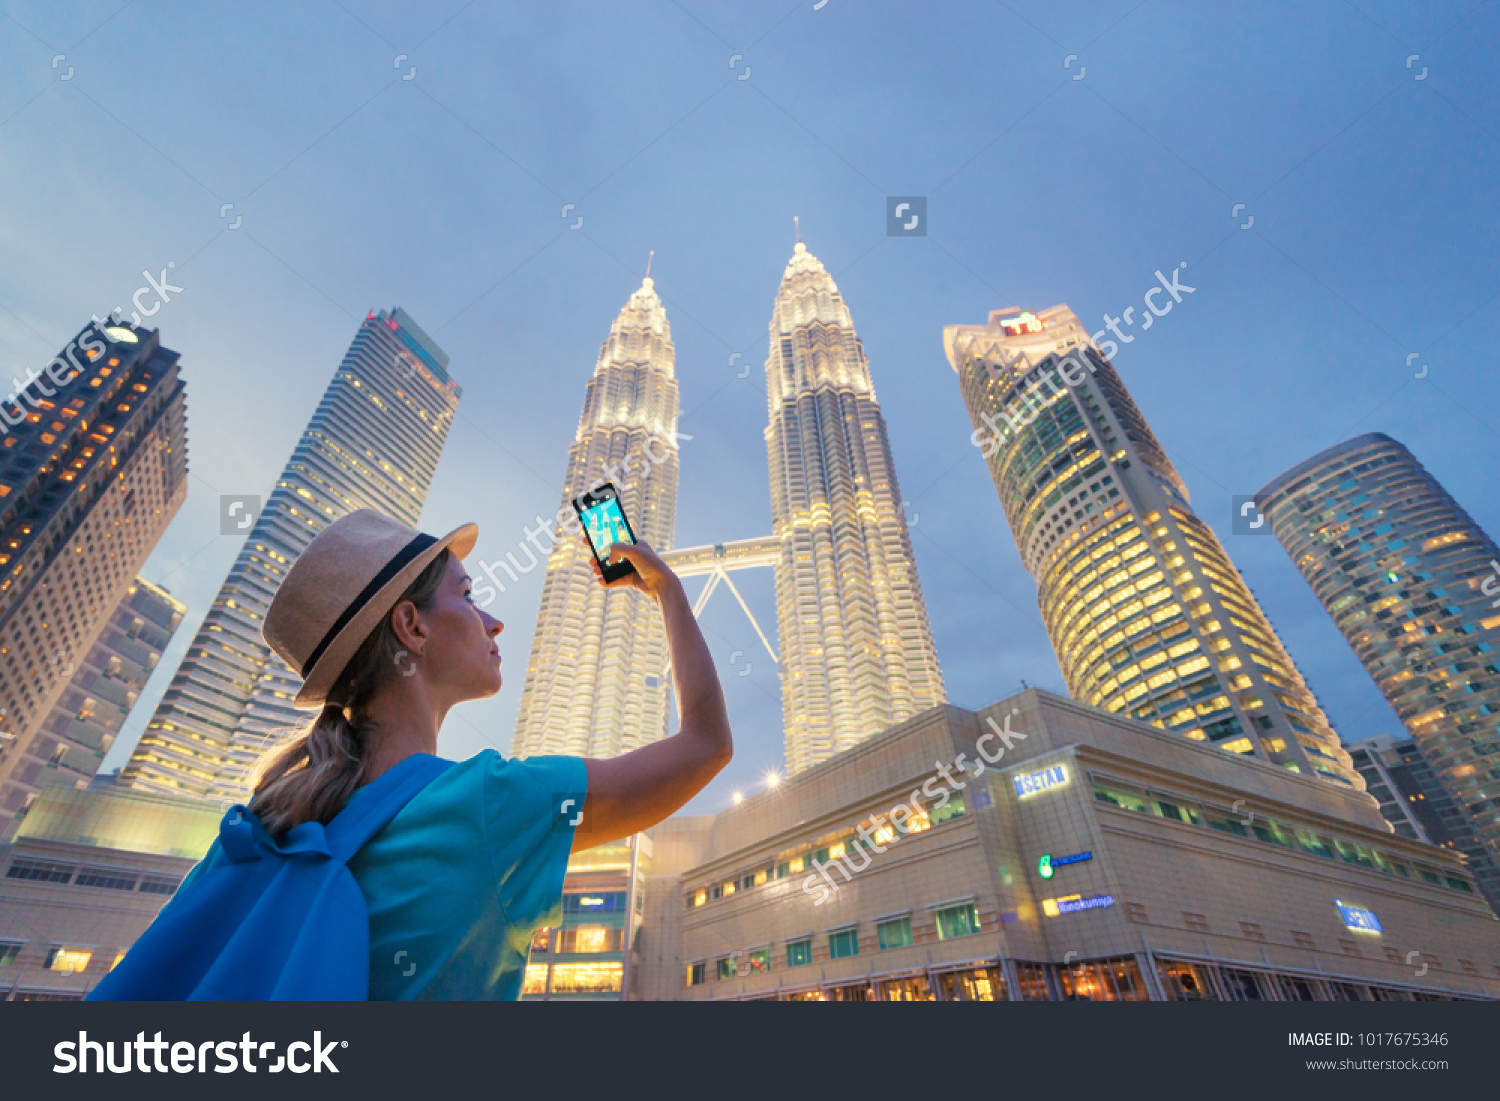 Travel and technology. Young  woman taking photo with her smartphone of Petronas Twins Towers in Kuala-Lumpur at evening, Malaysia, 23 November 2015. #1017675346